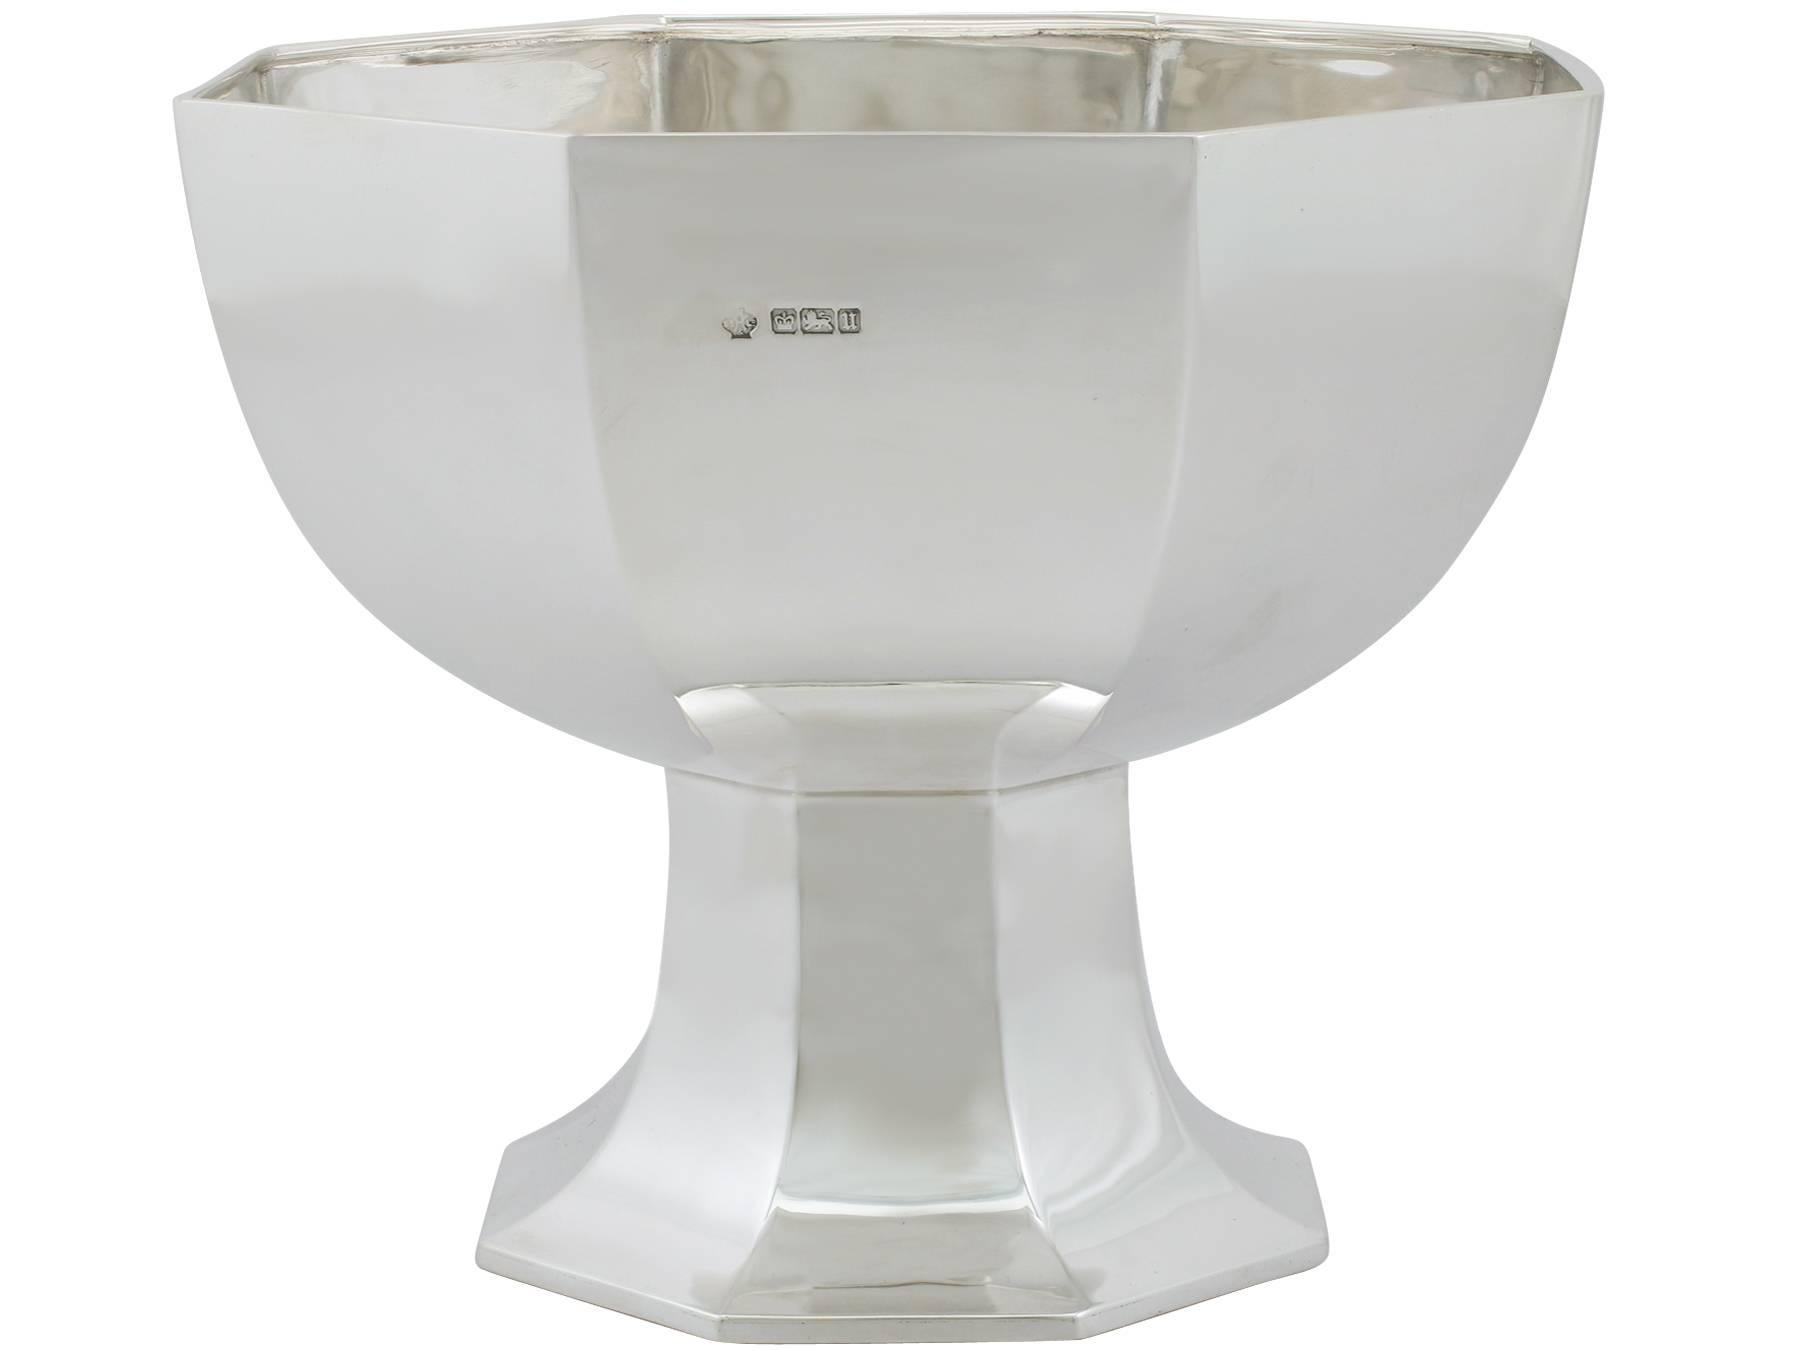 A fine and impressive antique George V English sterling silver presentation bowl; an addition to our presentation silverware collection

This fine antique George V sterling silver presentation bowl has a plain rounded octagonal panelled